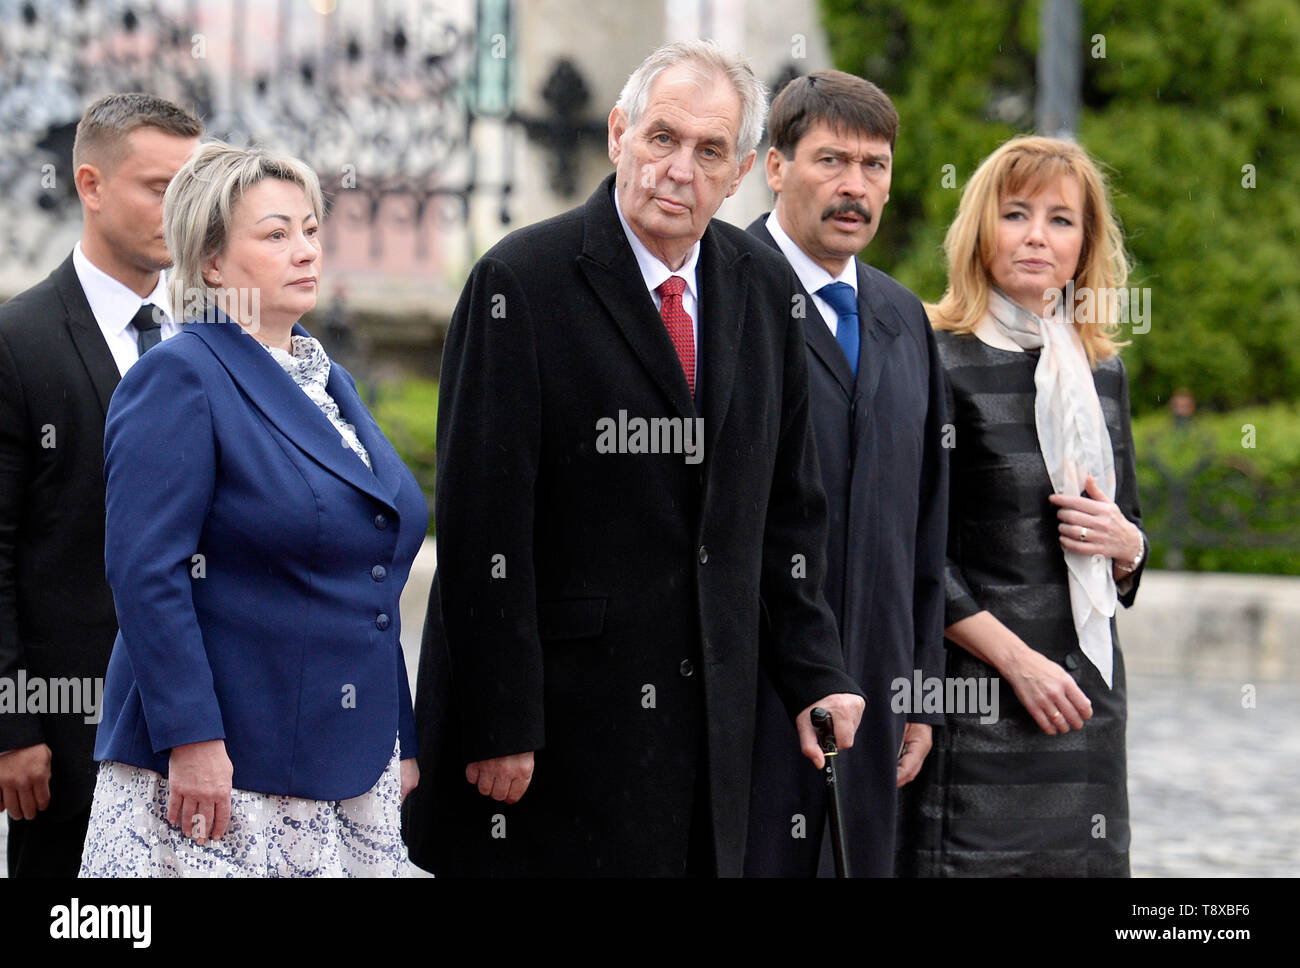 Budapest Hungary 15th May 2019 Czech President Milos Zeman 3rd From Right And His Wife